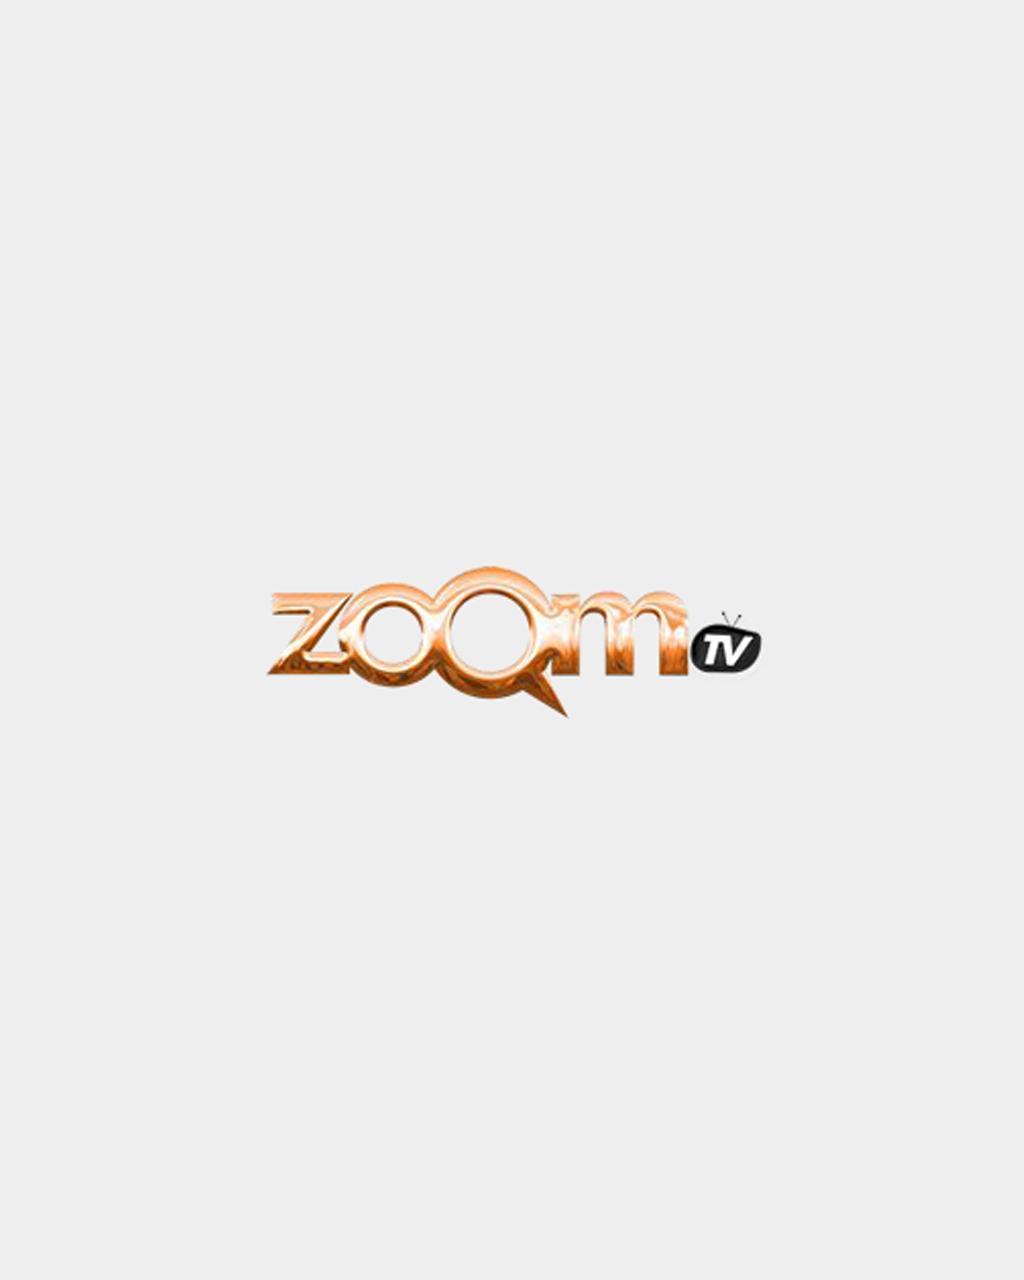 Zoomtv Logo - ZoomTV for Android - APK Download